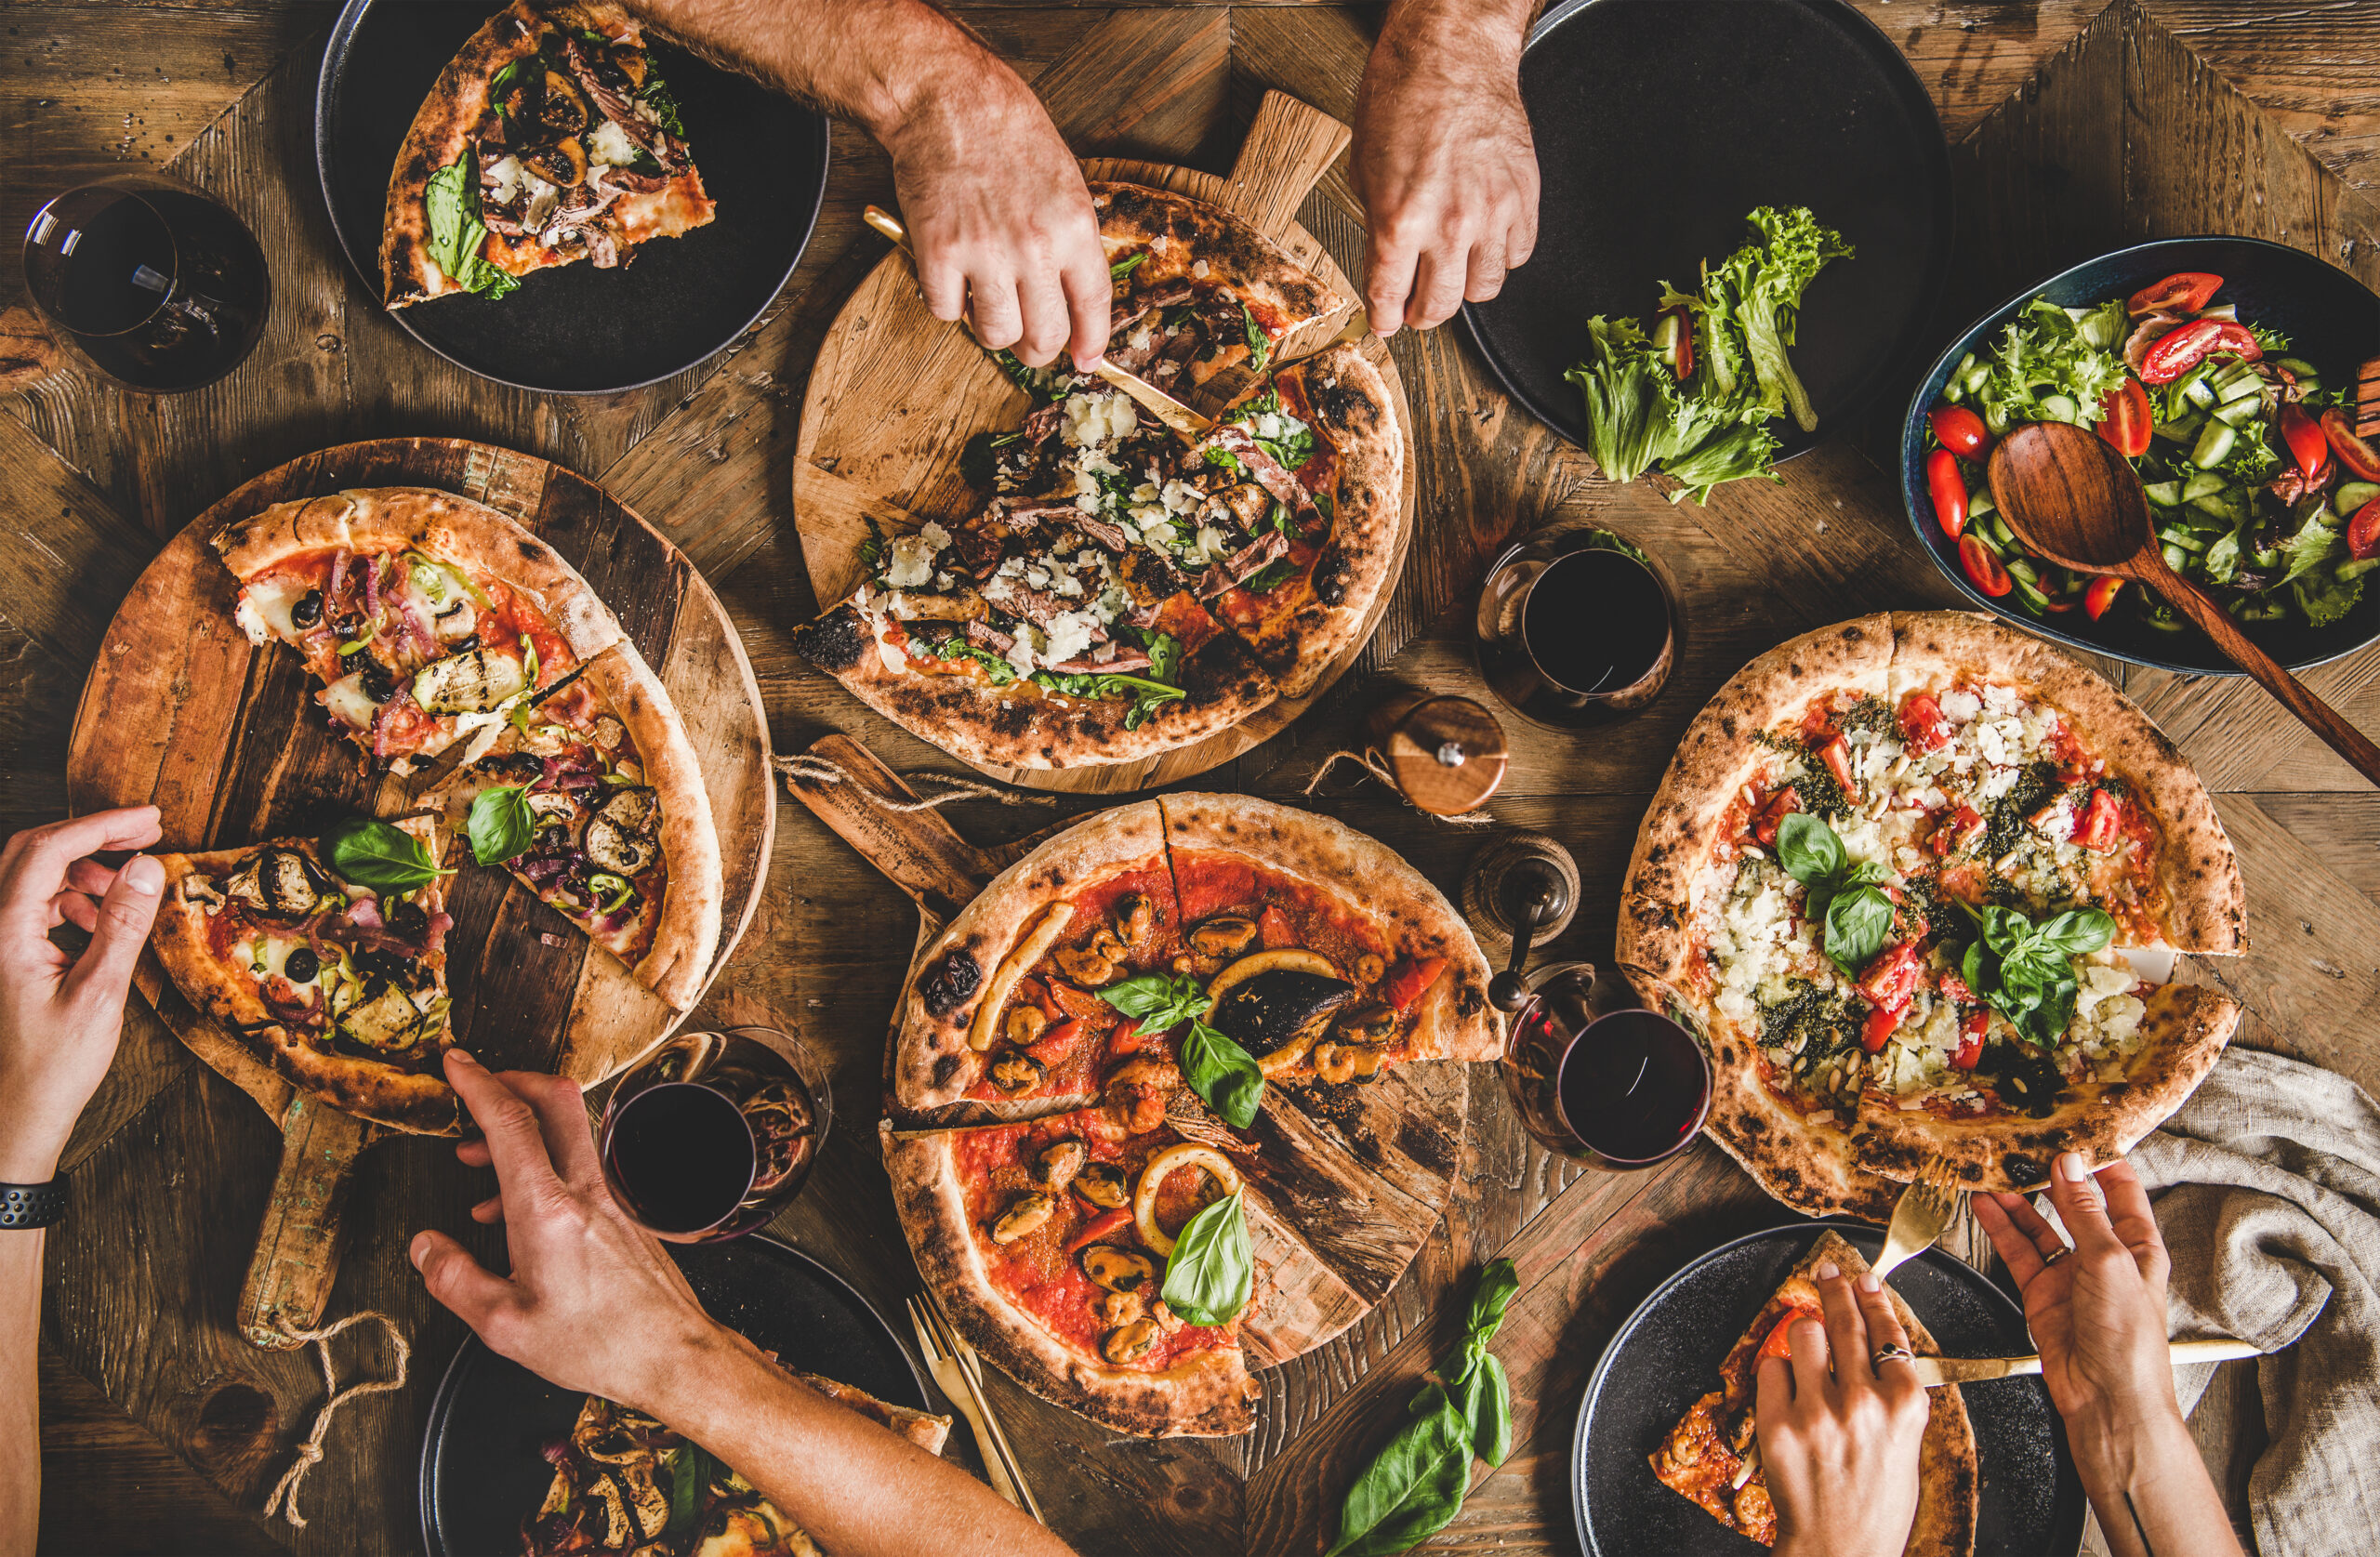 Group of People Eating Pizza with Various Drinks